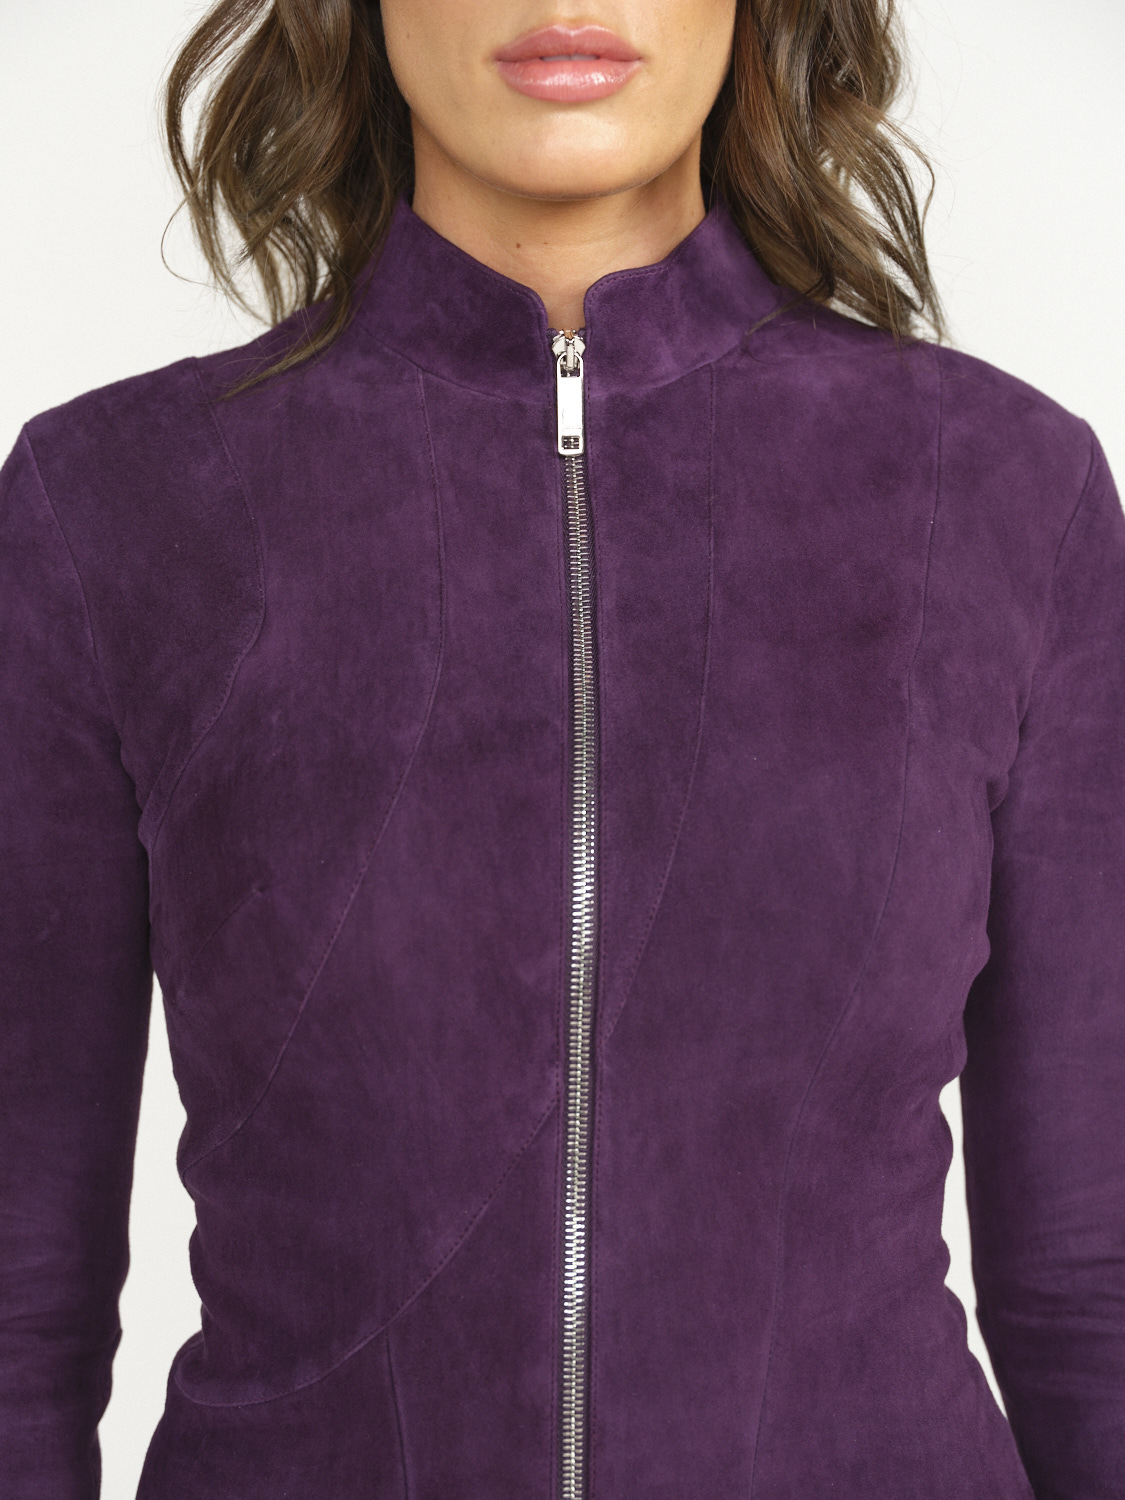 jitrois Ayna - Jacket with waist seams and stand-up collar purple 36